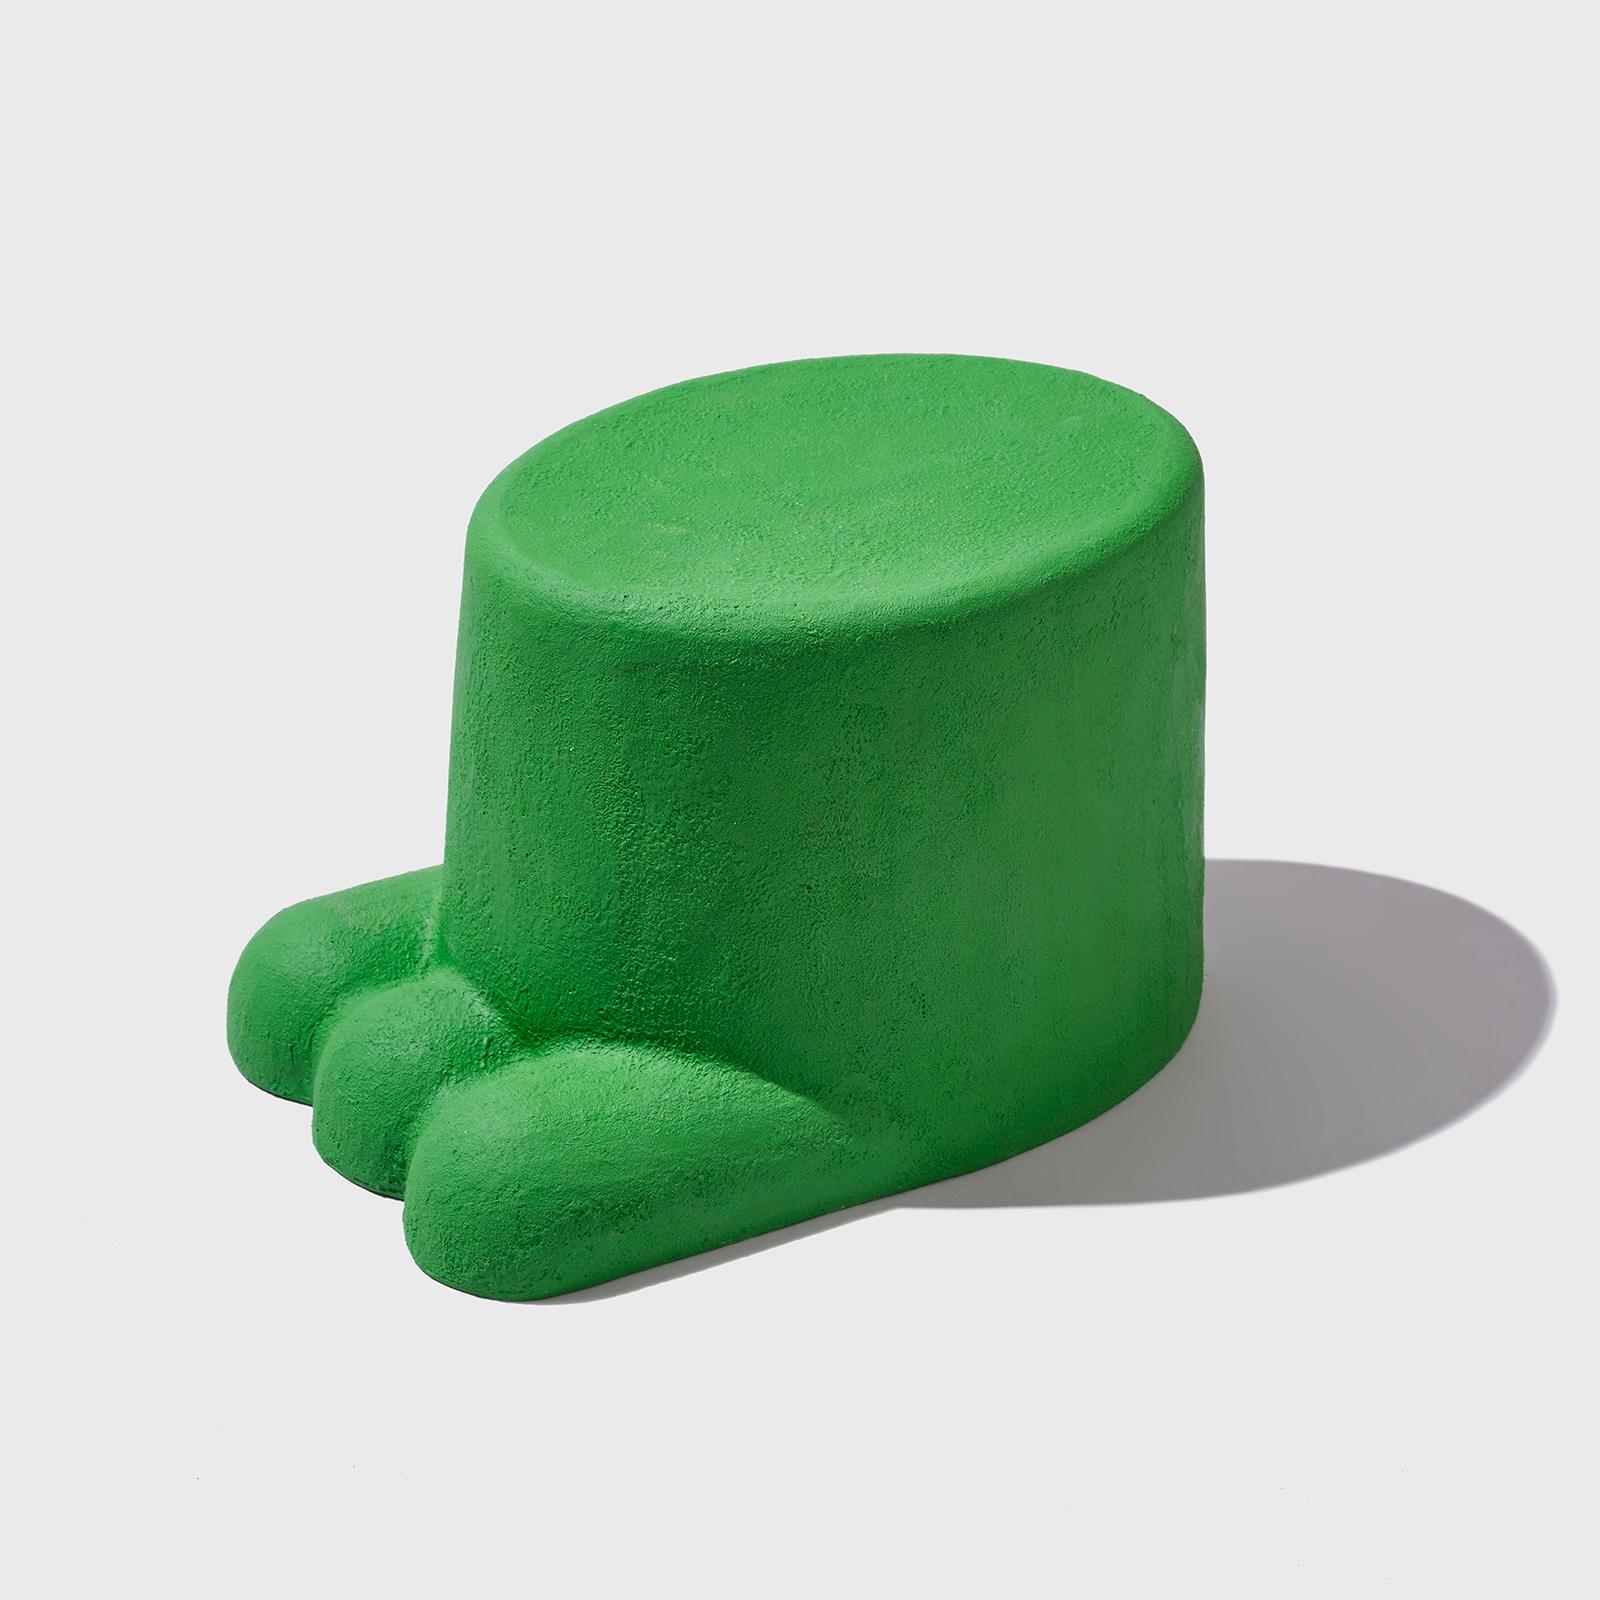 Mini paw stool by Hakmin Lee
Materials: FRP
Dimensions: 41 x 26 x H 26 cm
4 kg

Available in FRP yellow/ blue/ green/ pink/ white/ orange


Studio HAK is seoul based studio led by designer Hakmin Lee, who has an ambition of creating our